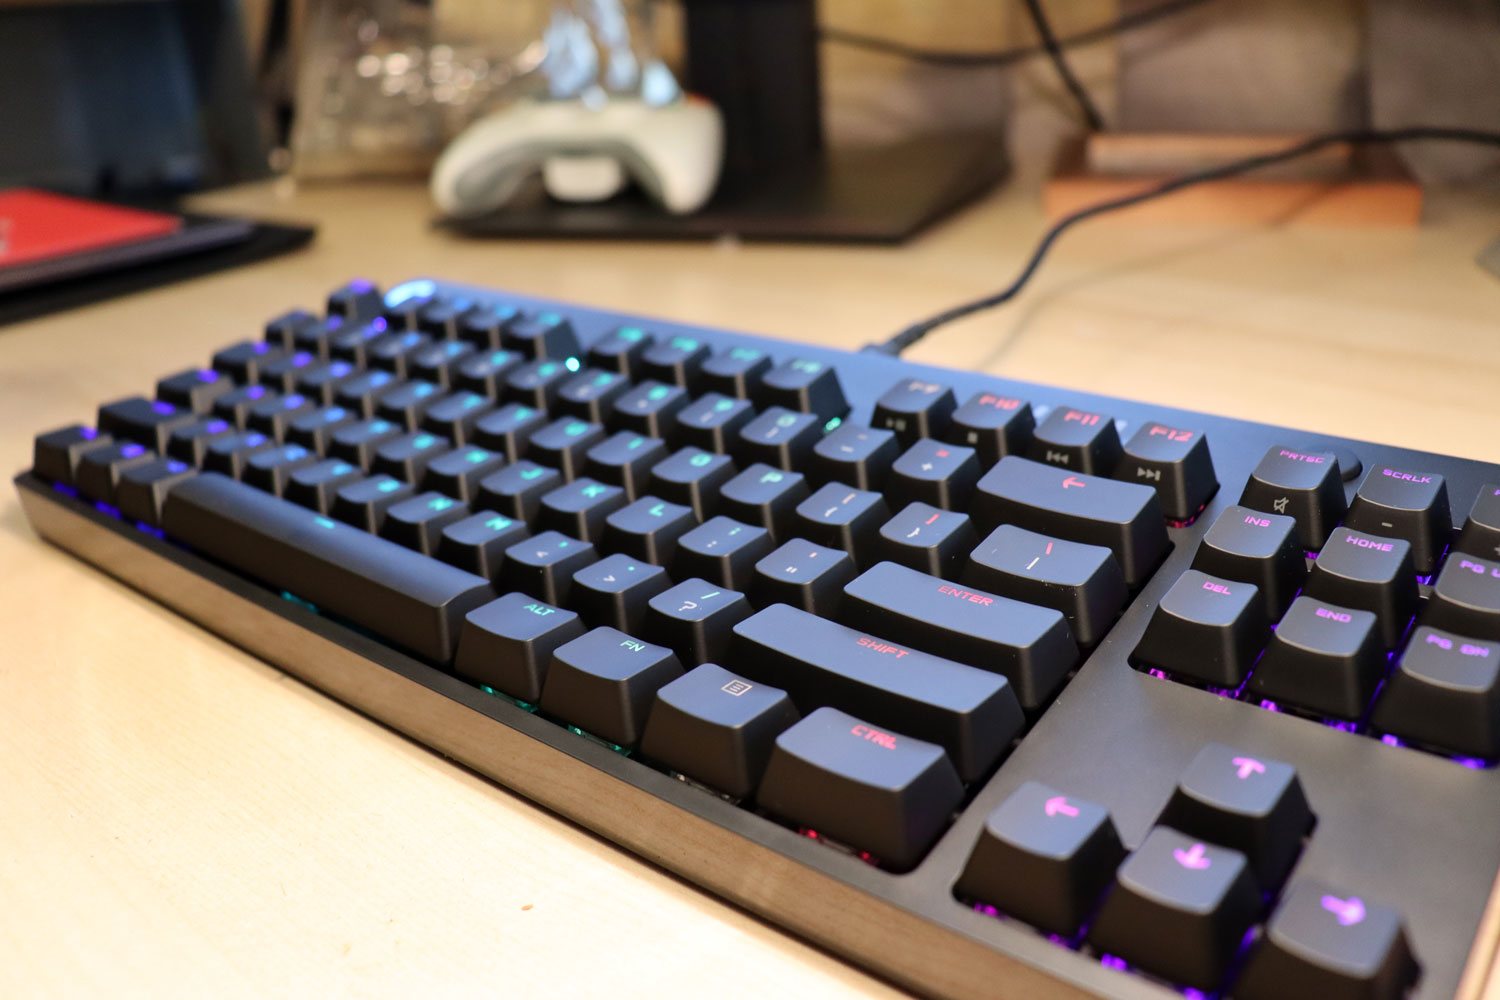 Logitech Pro X Review: The Last Gaming Keyboard You'll Ever Need | Digital Trends